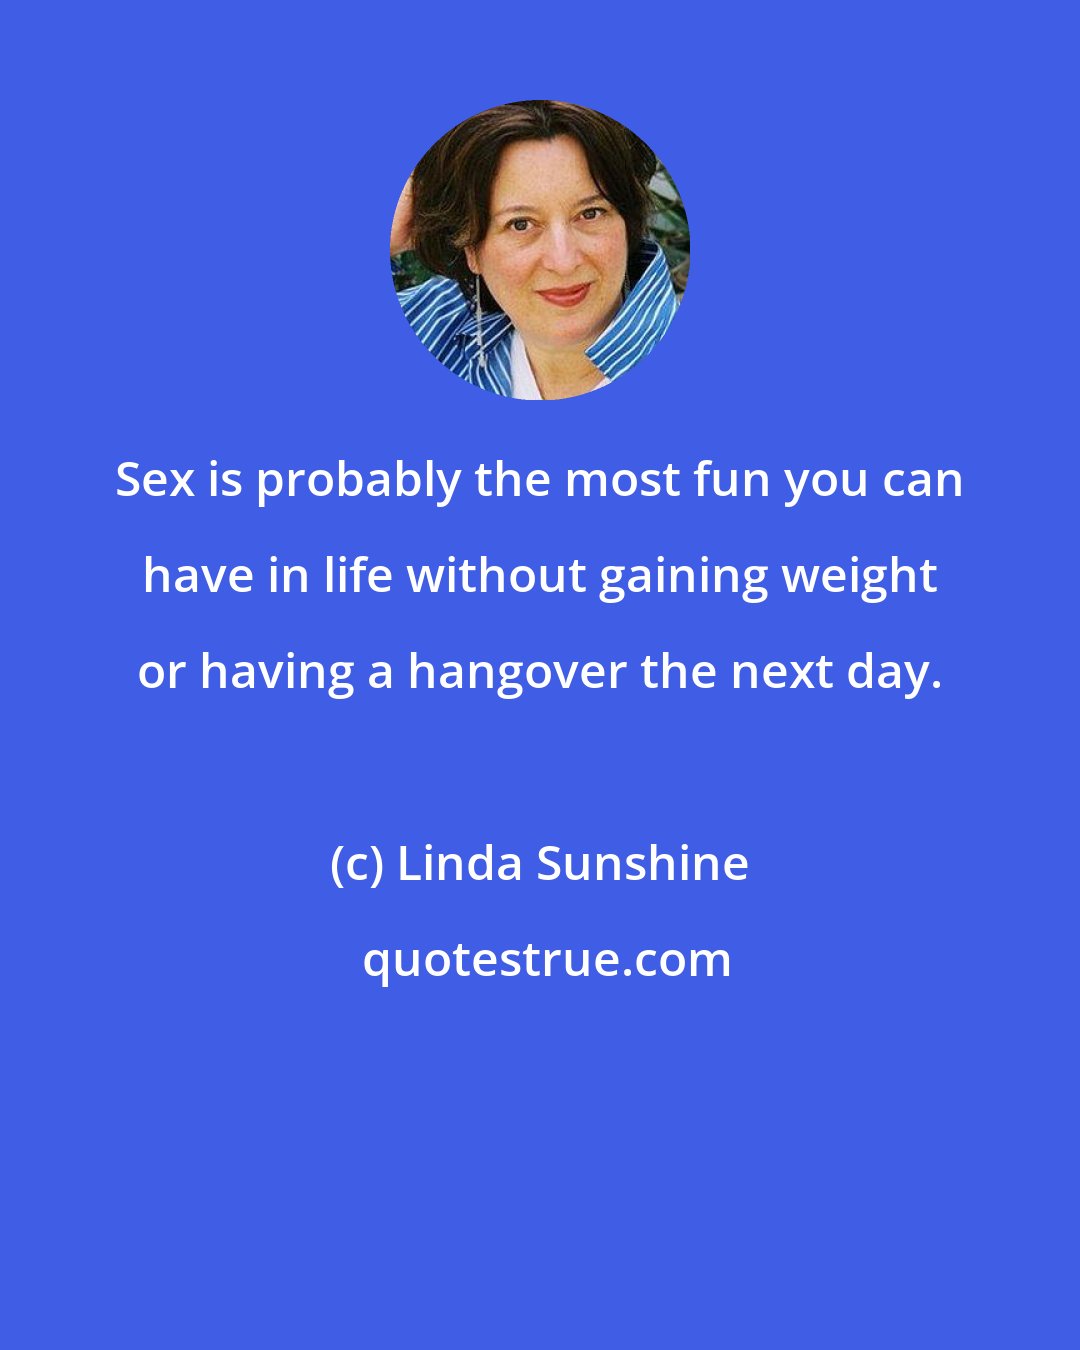 Linda Sunshine: Sex is probably the most fun you can have in life without gaining weight or having a hangover the next day.